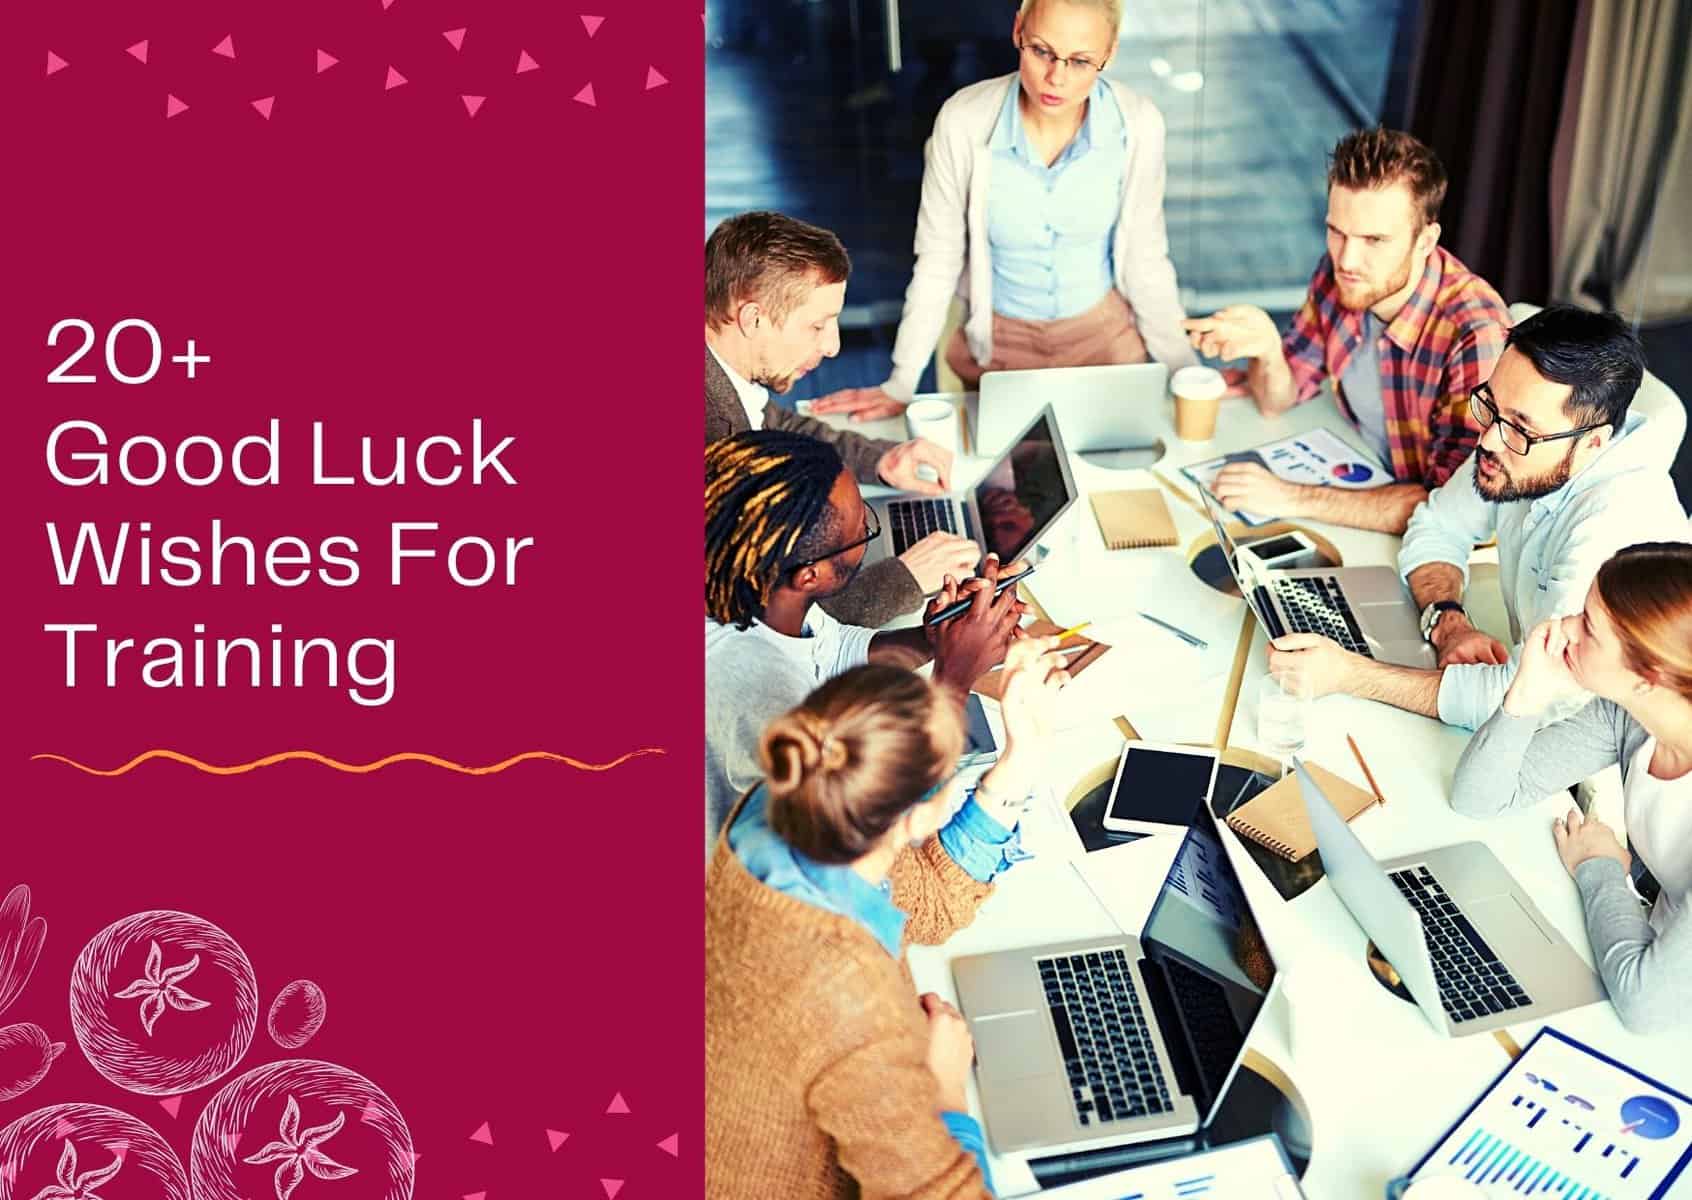 Read more about the article 20+ Good Luck Wishes For Training